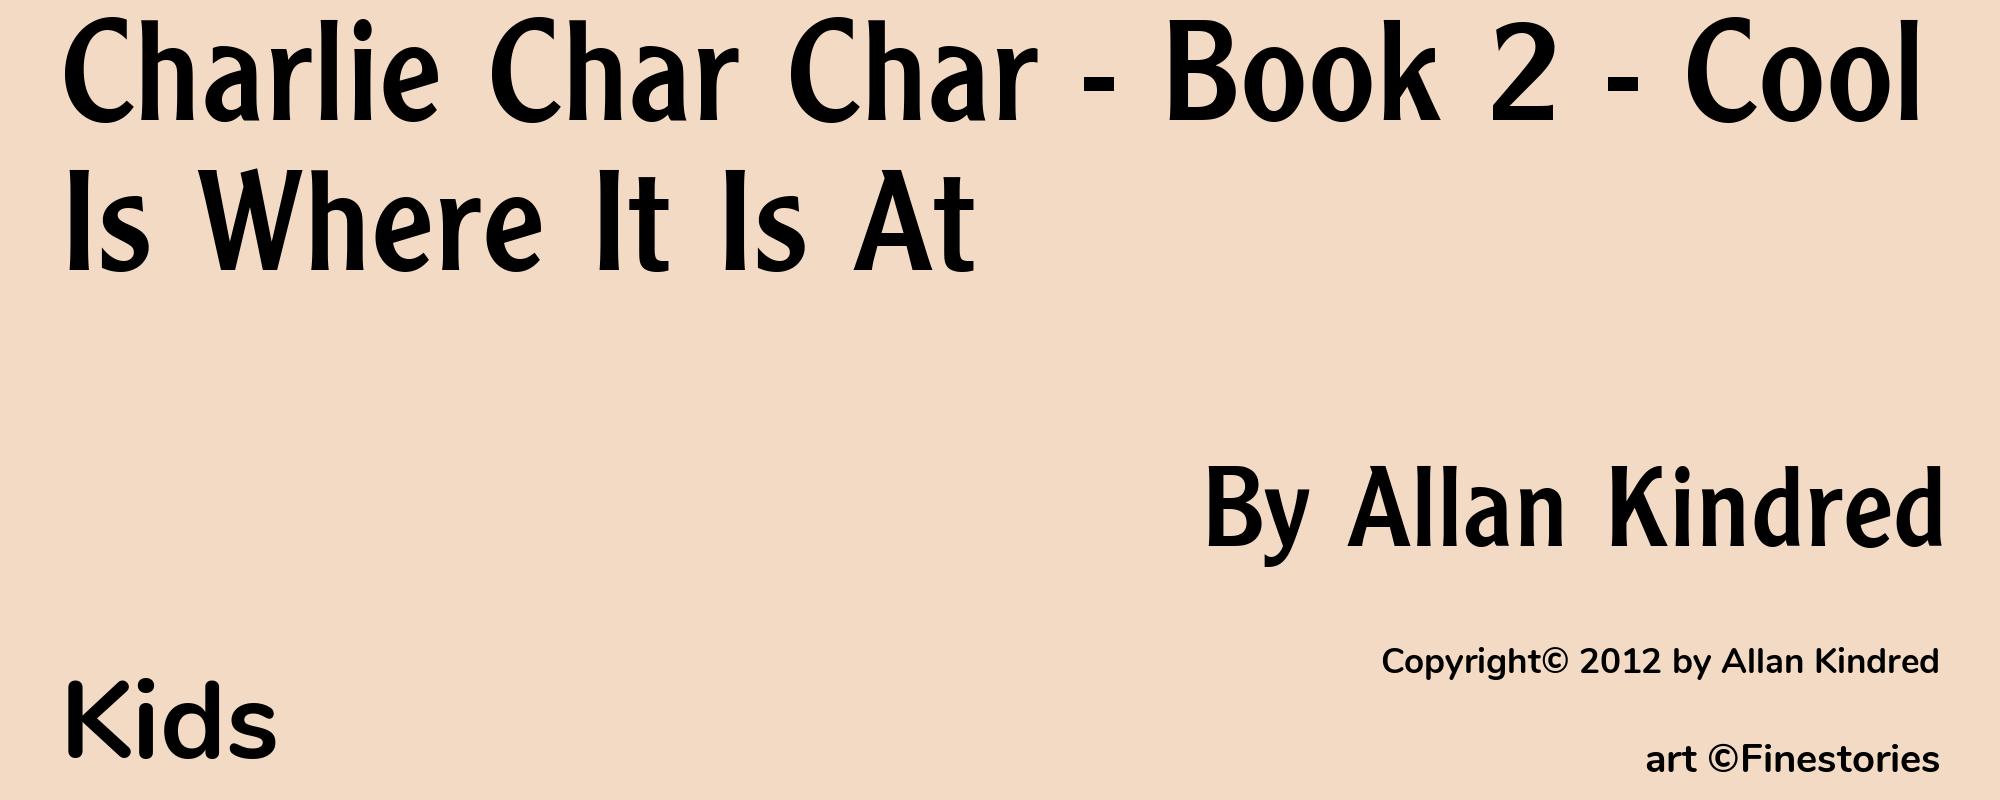 Charlie Char Char - Book 2 - Cool Is Where It Is At - Cover